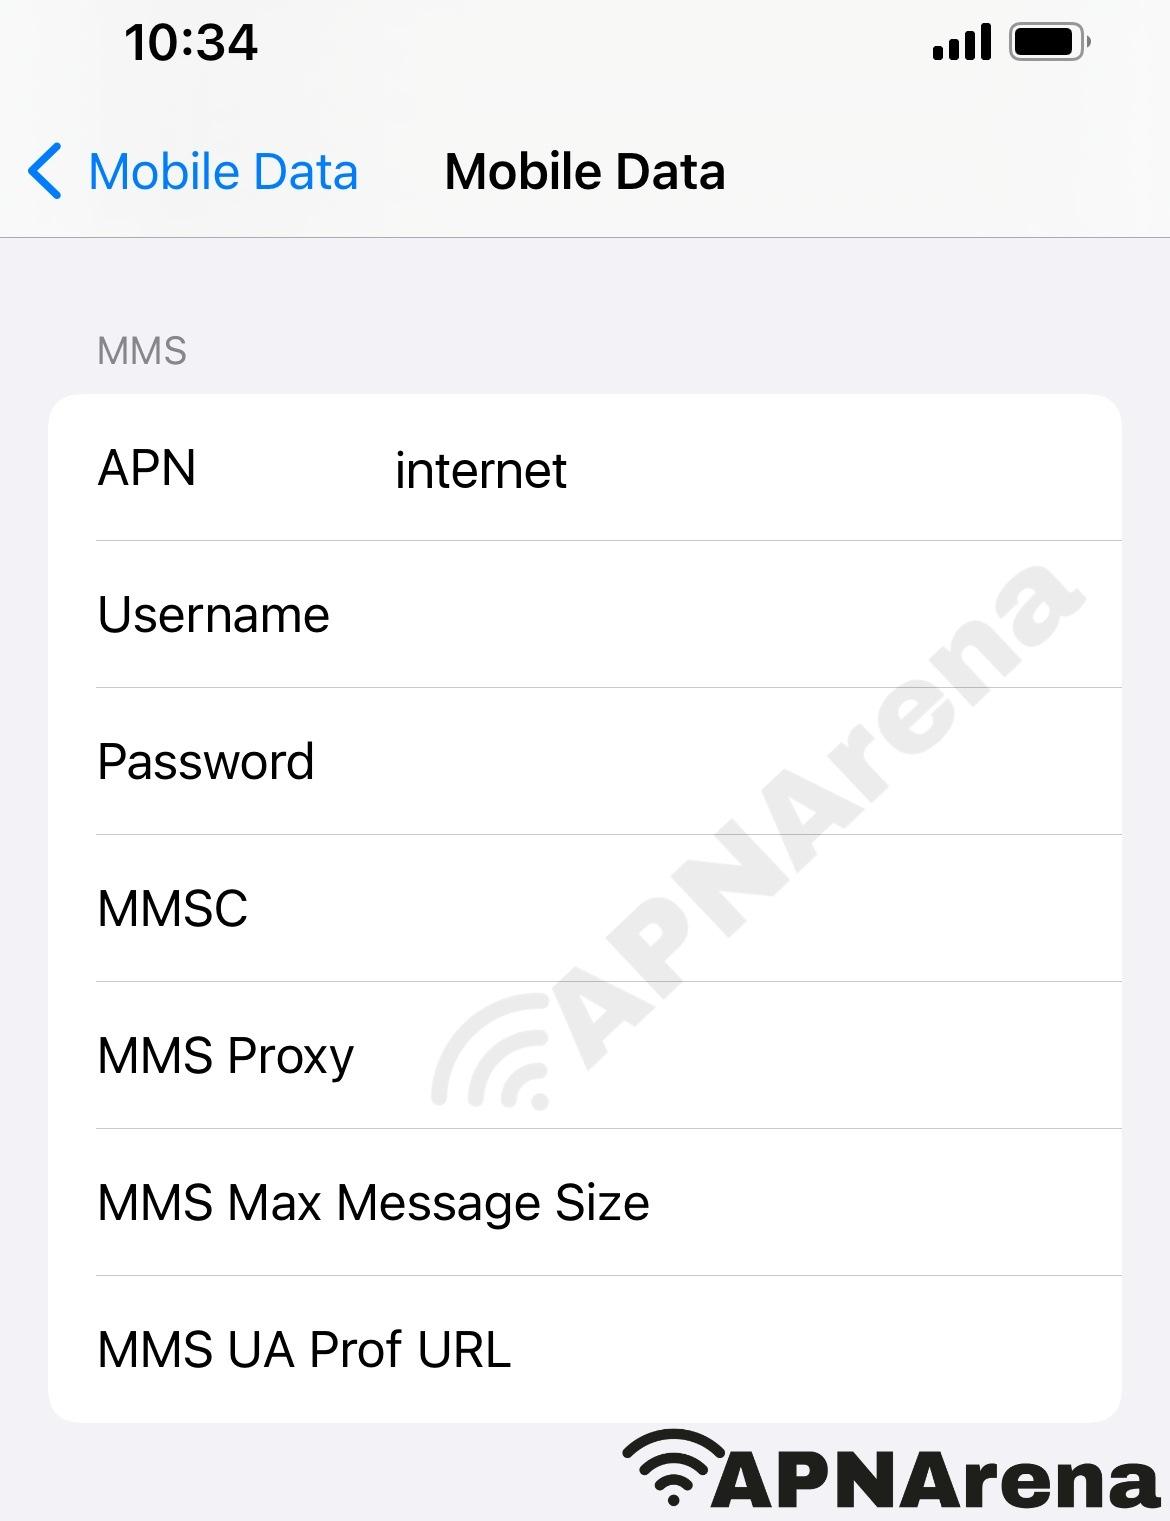 gotalk MMS Settings for iPhone